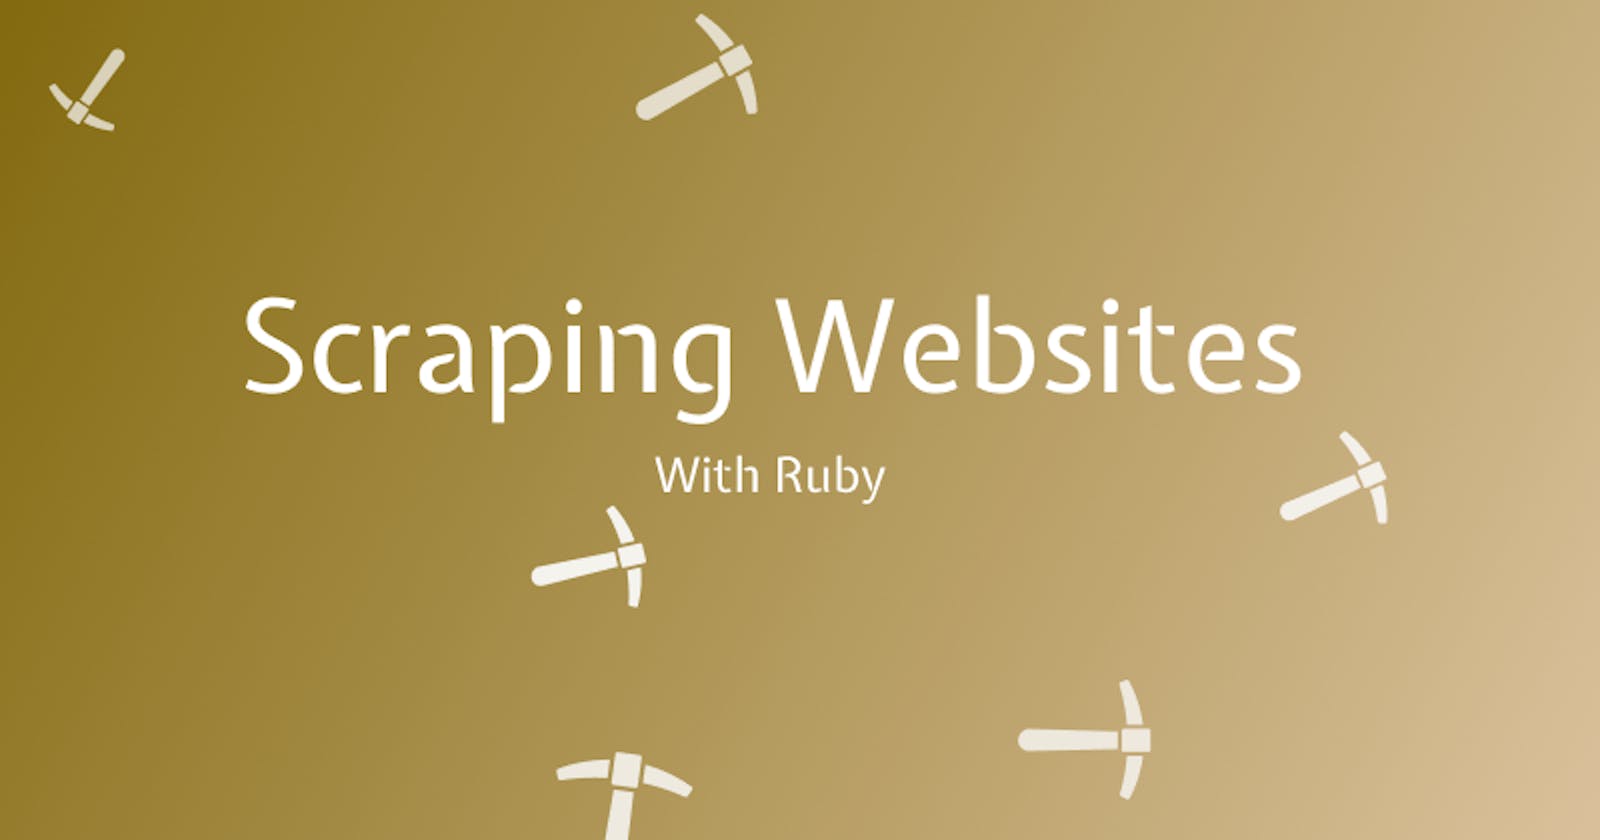 Scraping Websites with Ruby